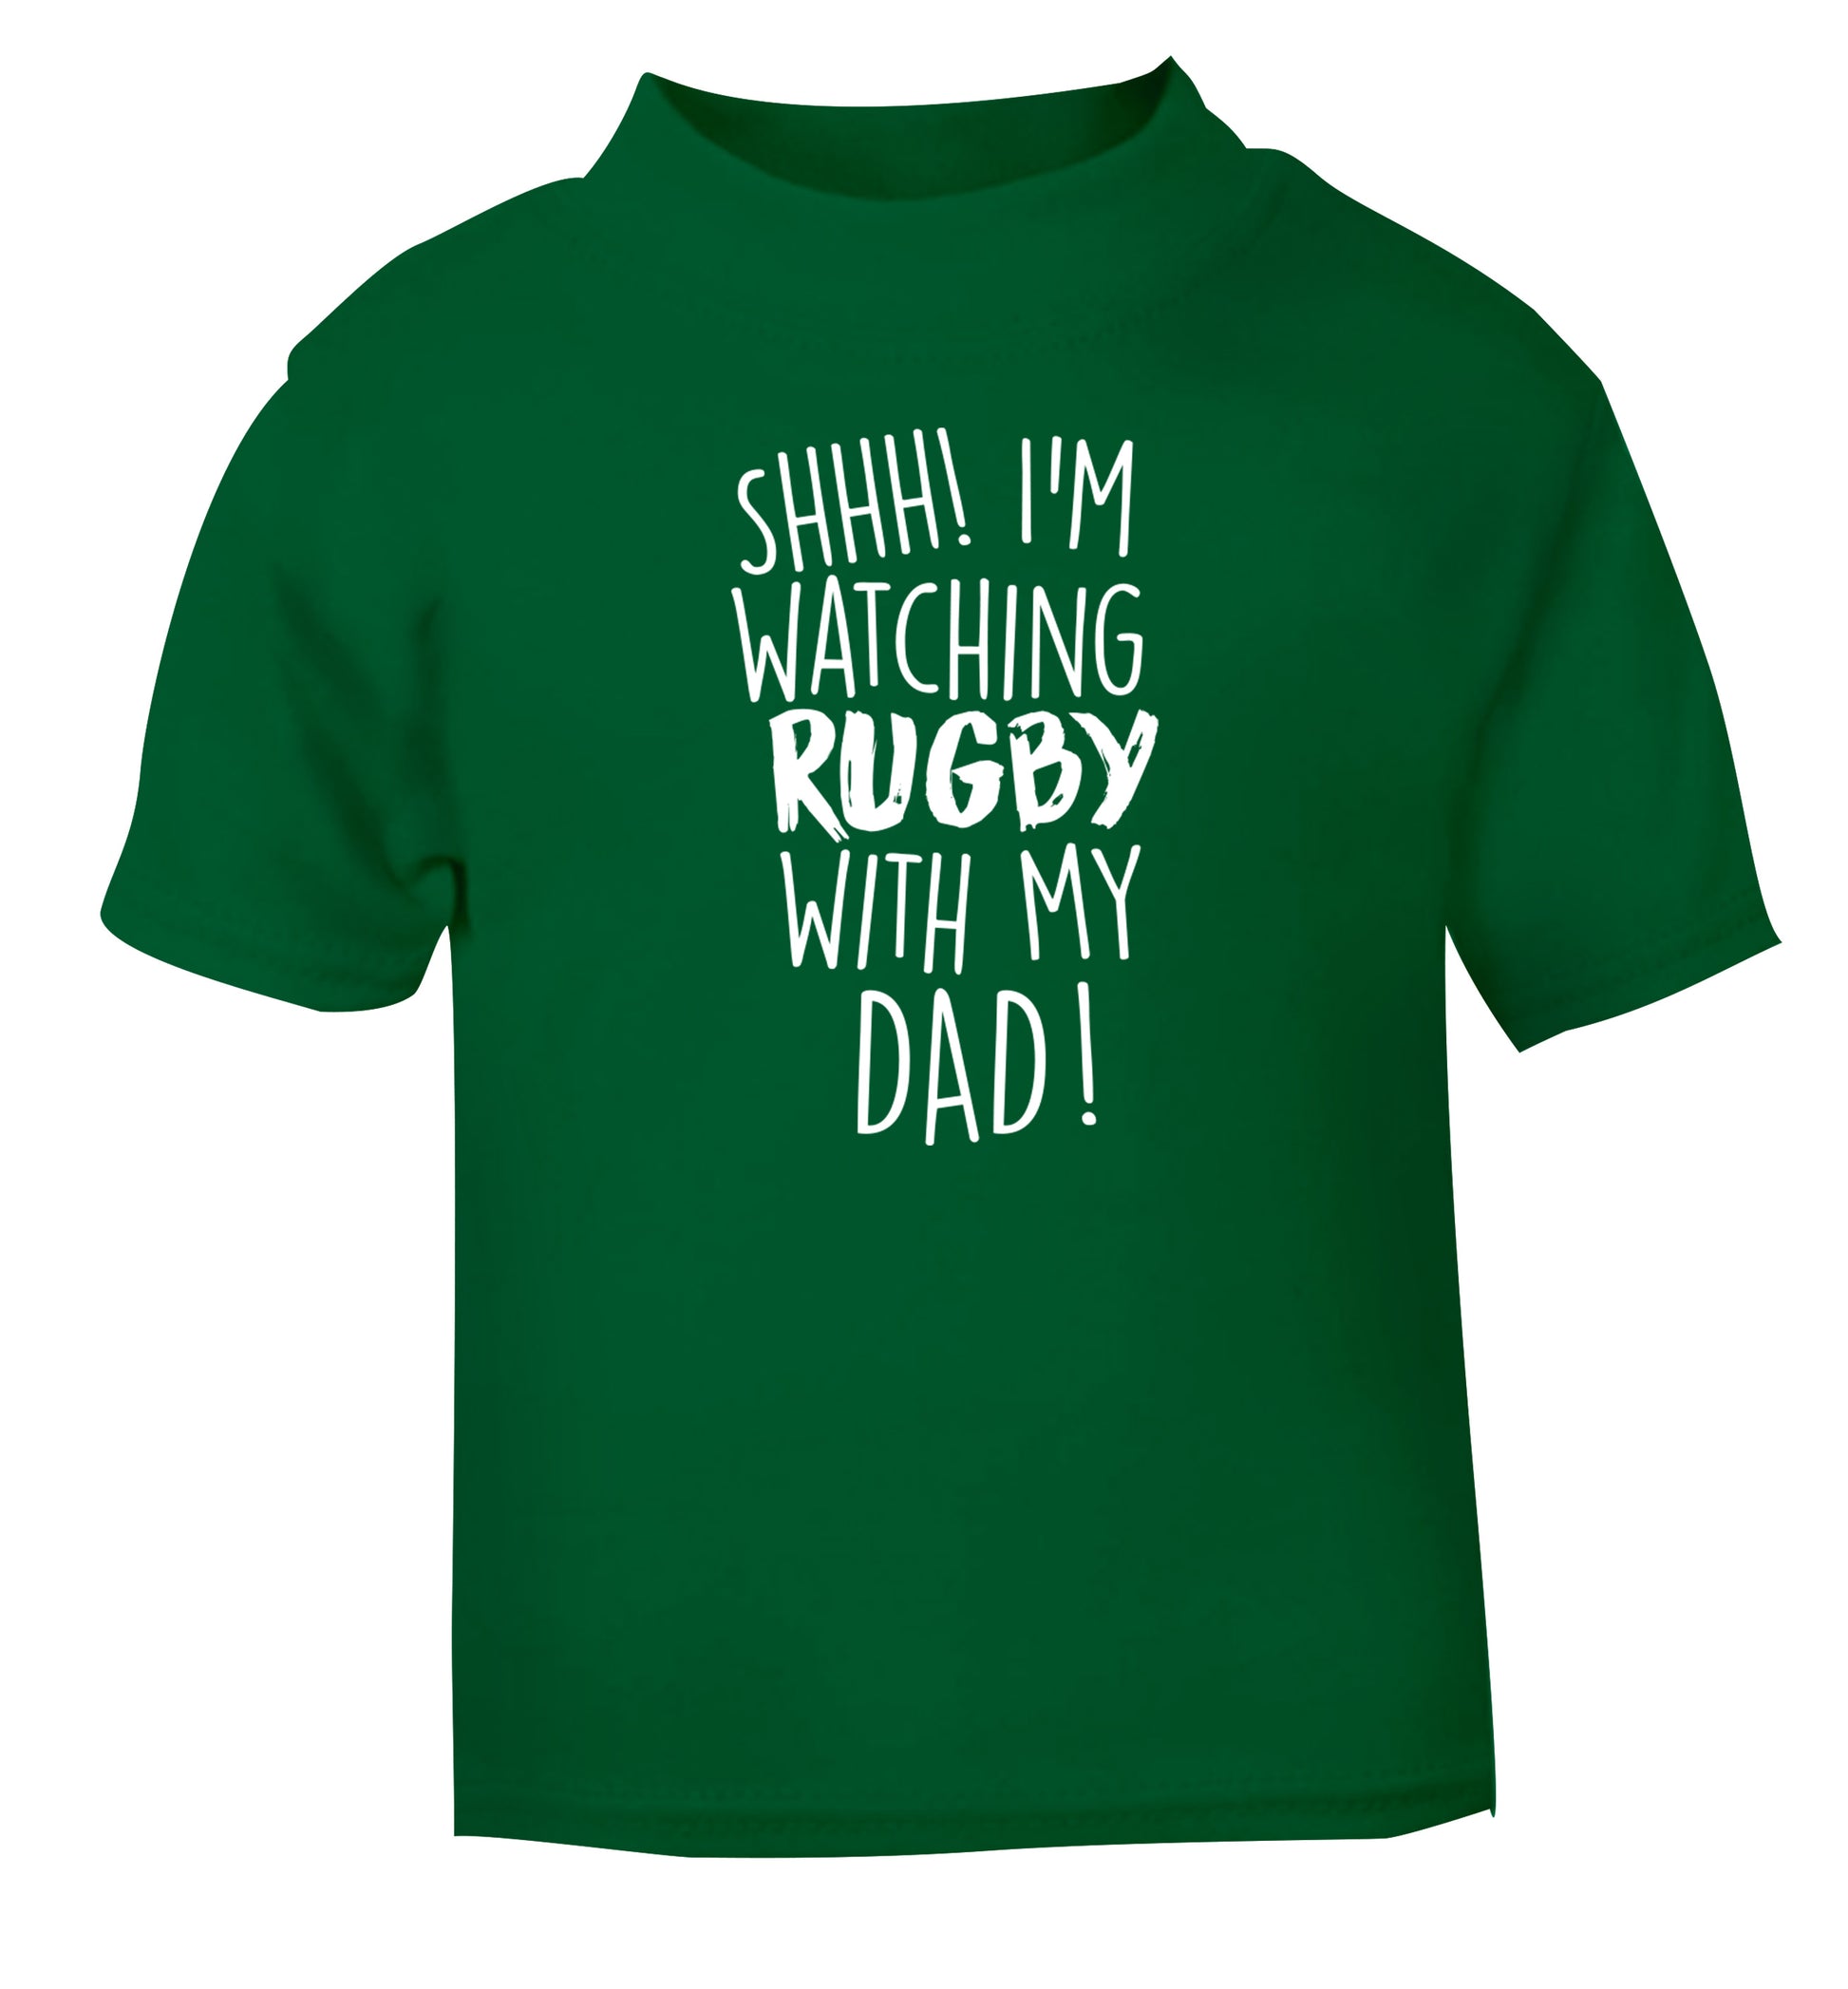 Shh... I'm watching rugby with my dad green Baby Toddler Tshirt 2 Years